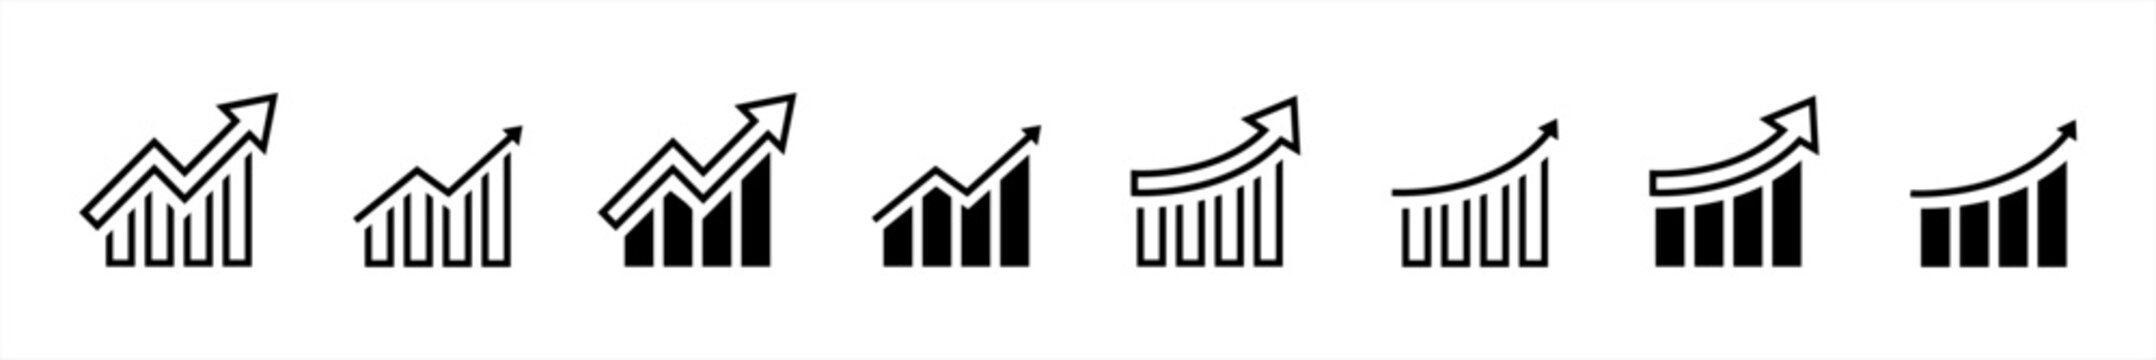 Growing graph icon set in line style. Business chart with arrow, Growths chart, Profit growing, Growth success, Chart increase simple black style symbol sign for apps and website, vector illustration.